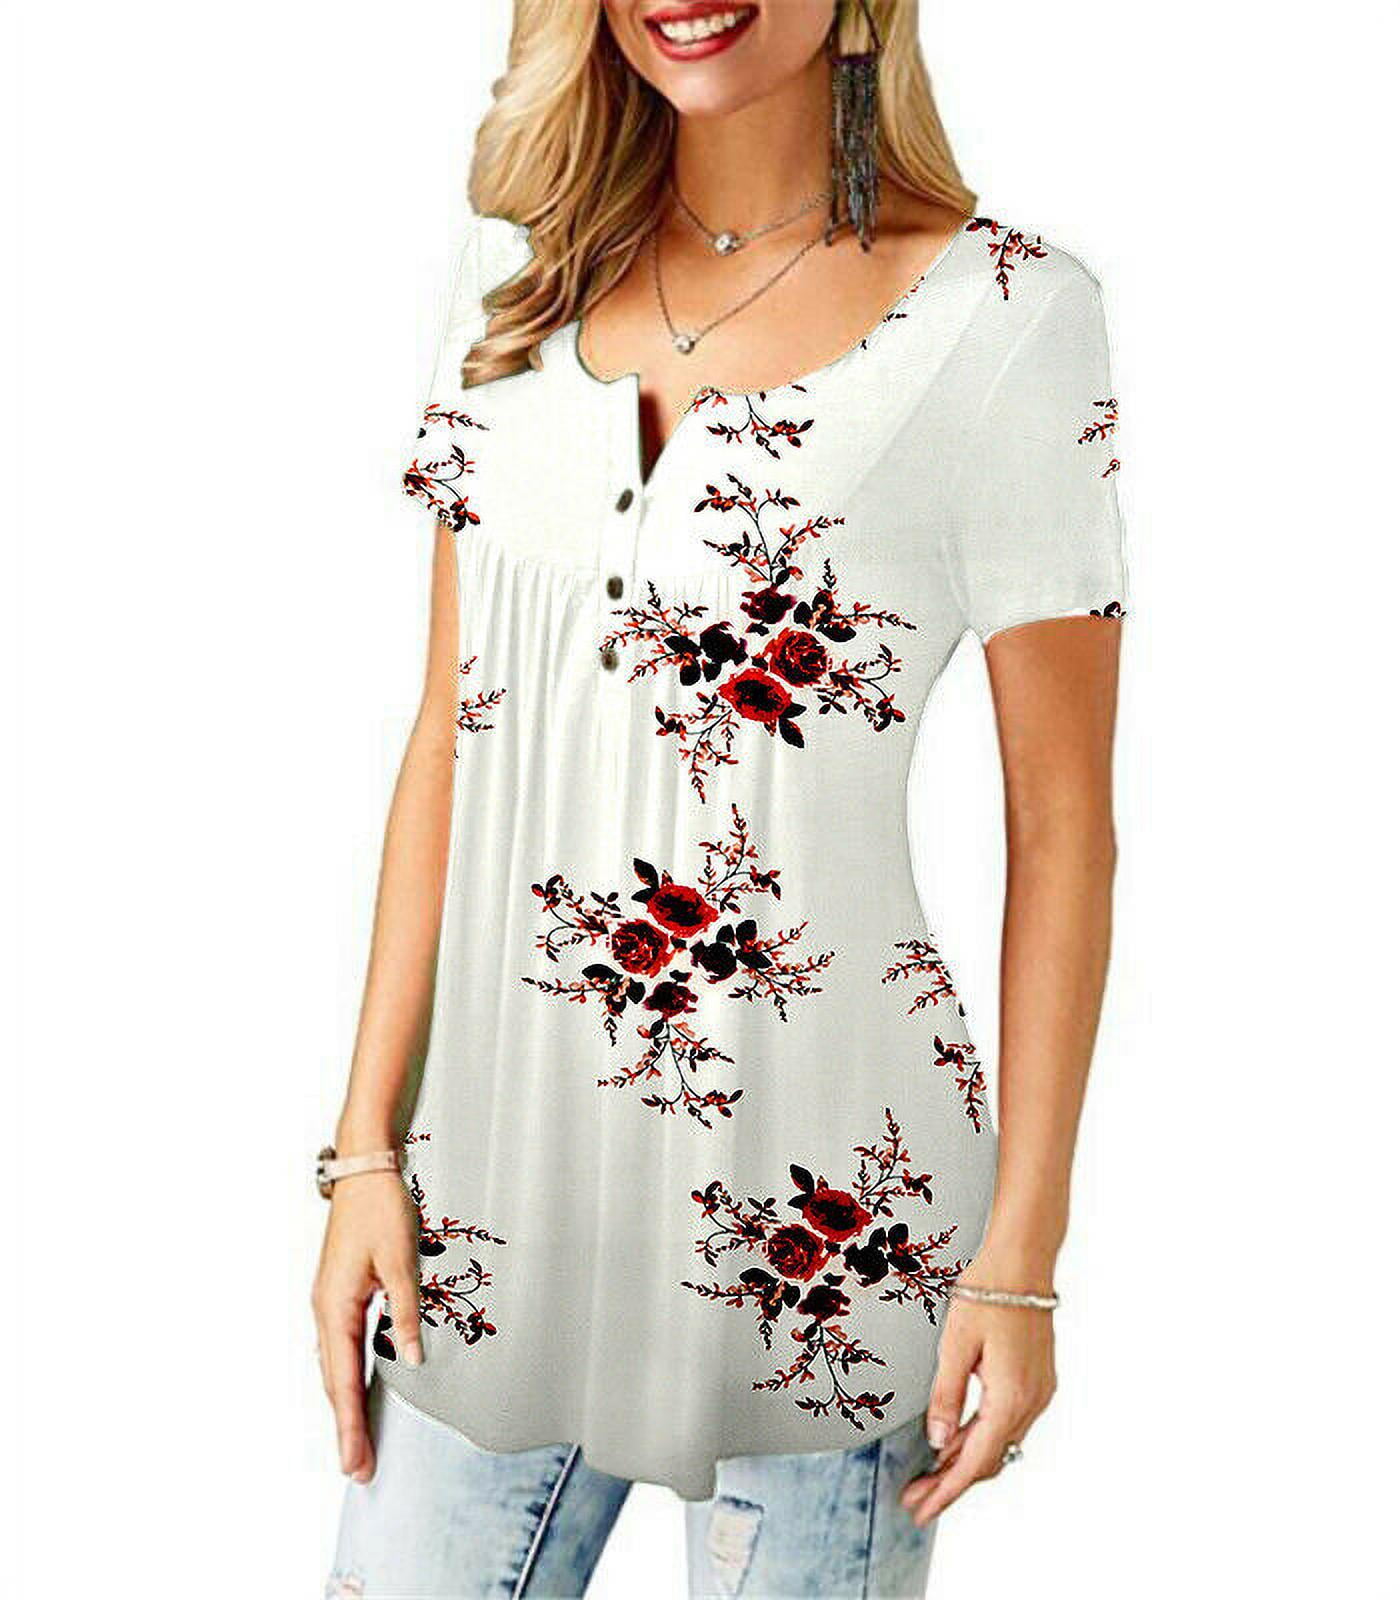 Womens Short Sleeve Summer Loose T Shirts Tee Ladies Floral Tunic Tops Blouse UK 